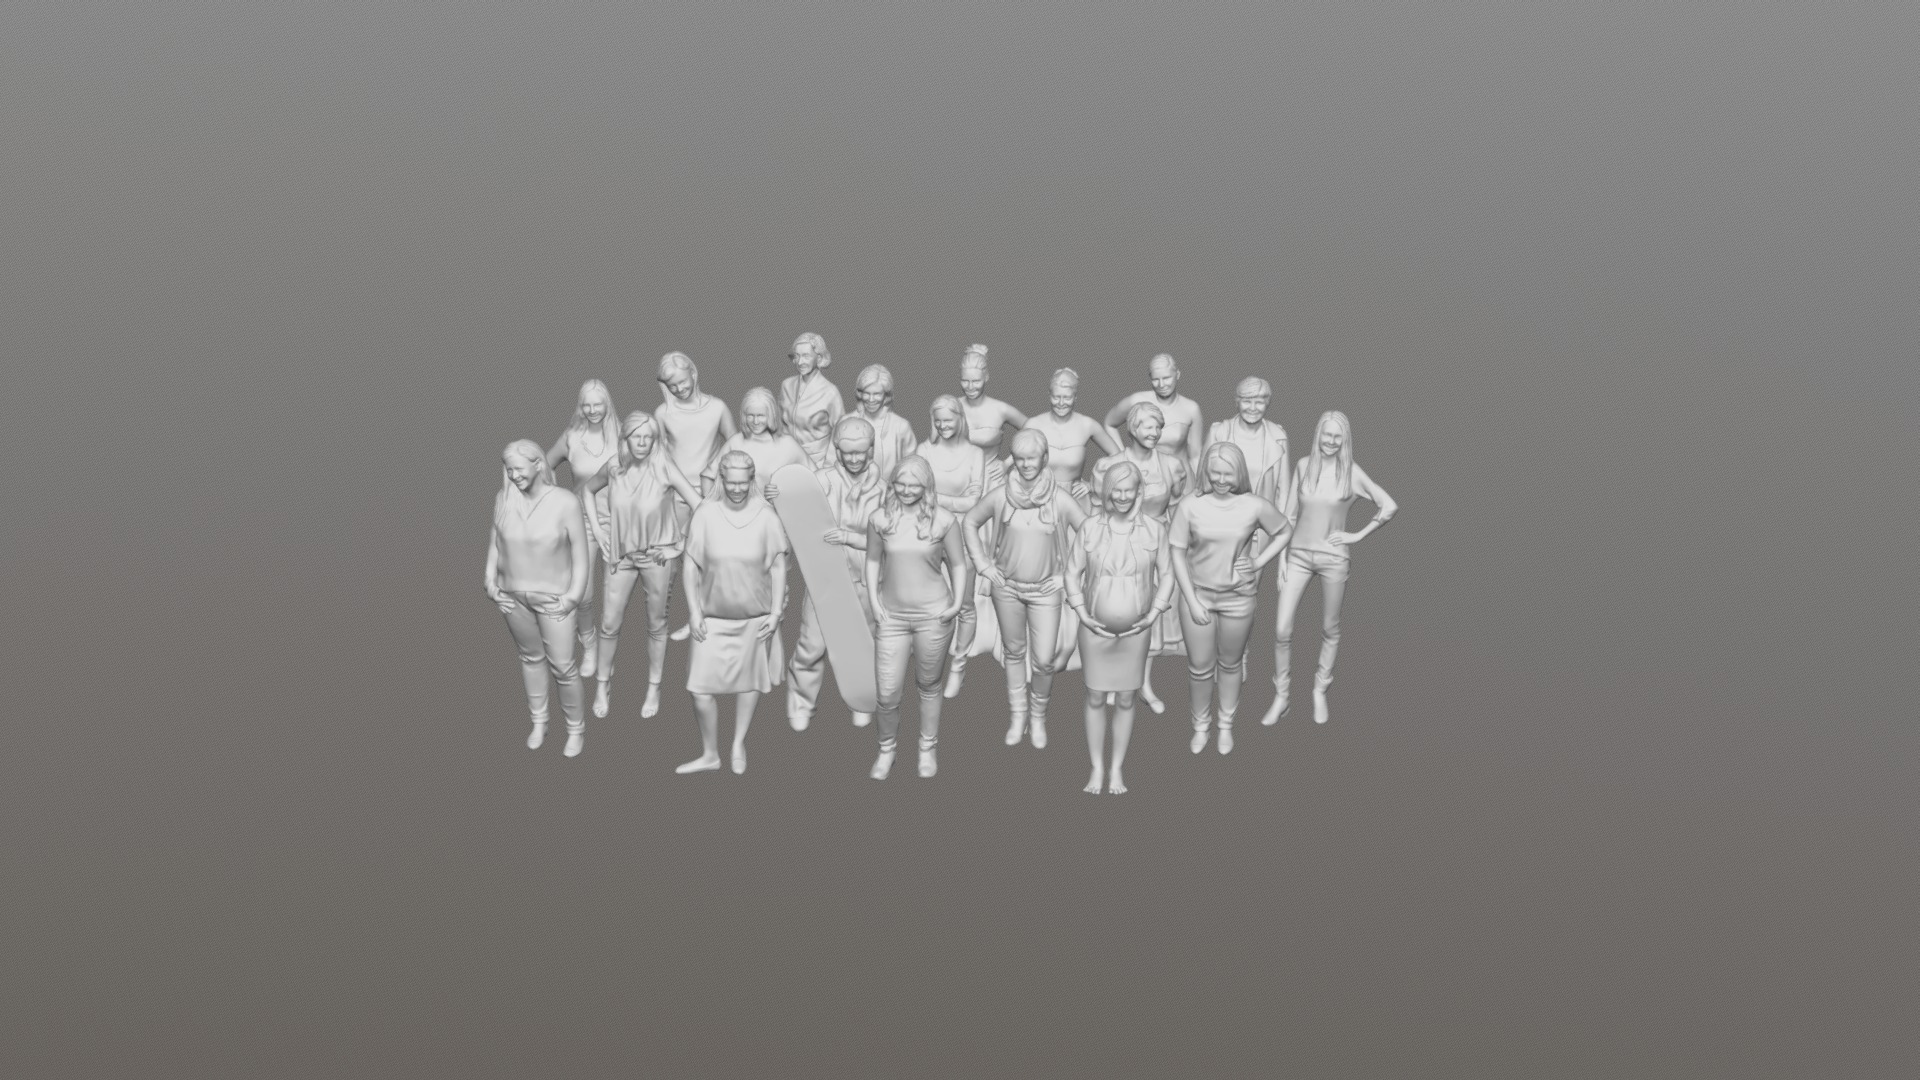 3D model Women-Package 2 - This is a 3D model of the Women-Package 2. The 3D model is about a group of people wearing white.